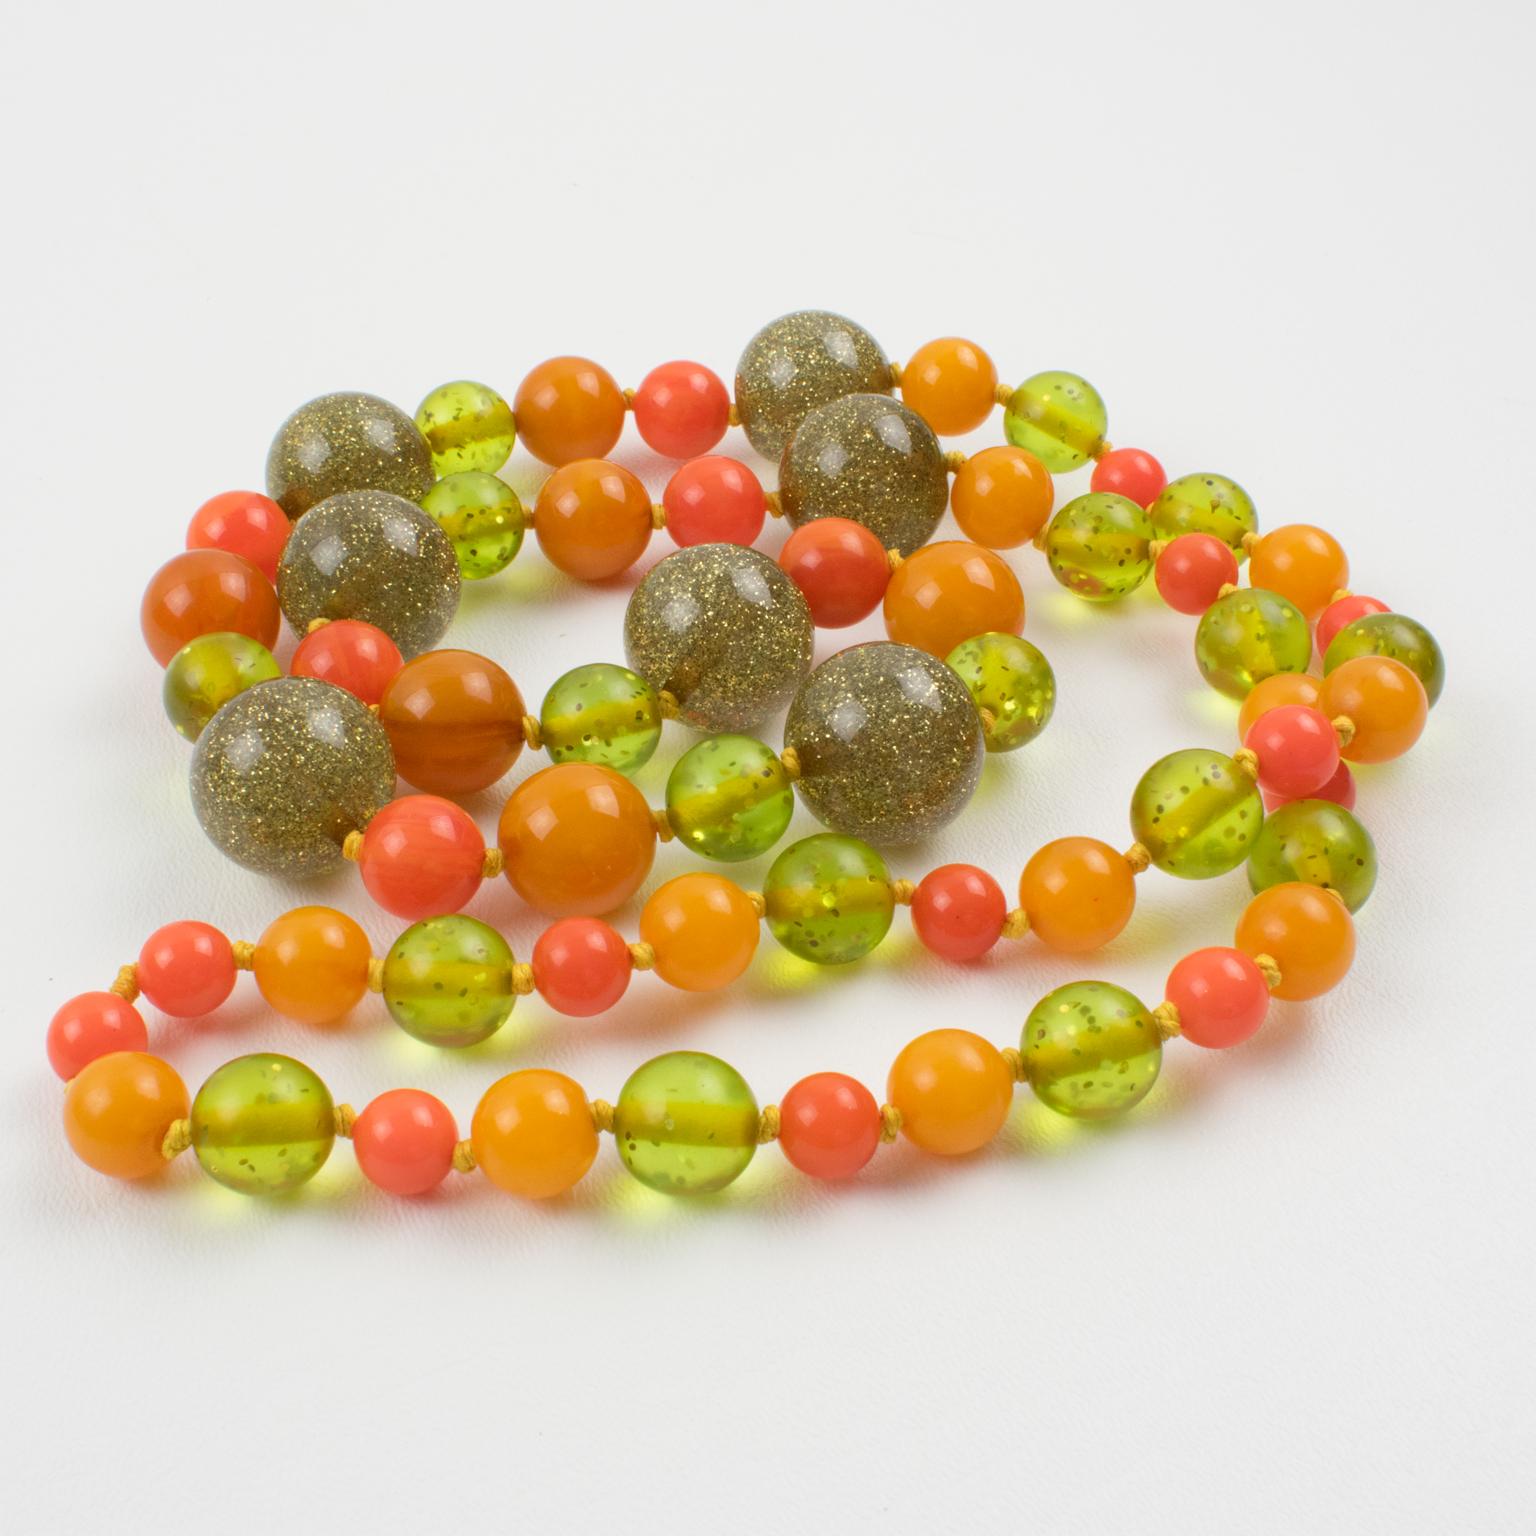 Bakelite and Lucite Extra Long Necklace with Orange, Green and Glitter Beads For Sale 1